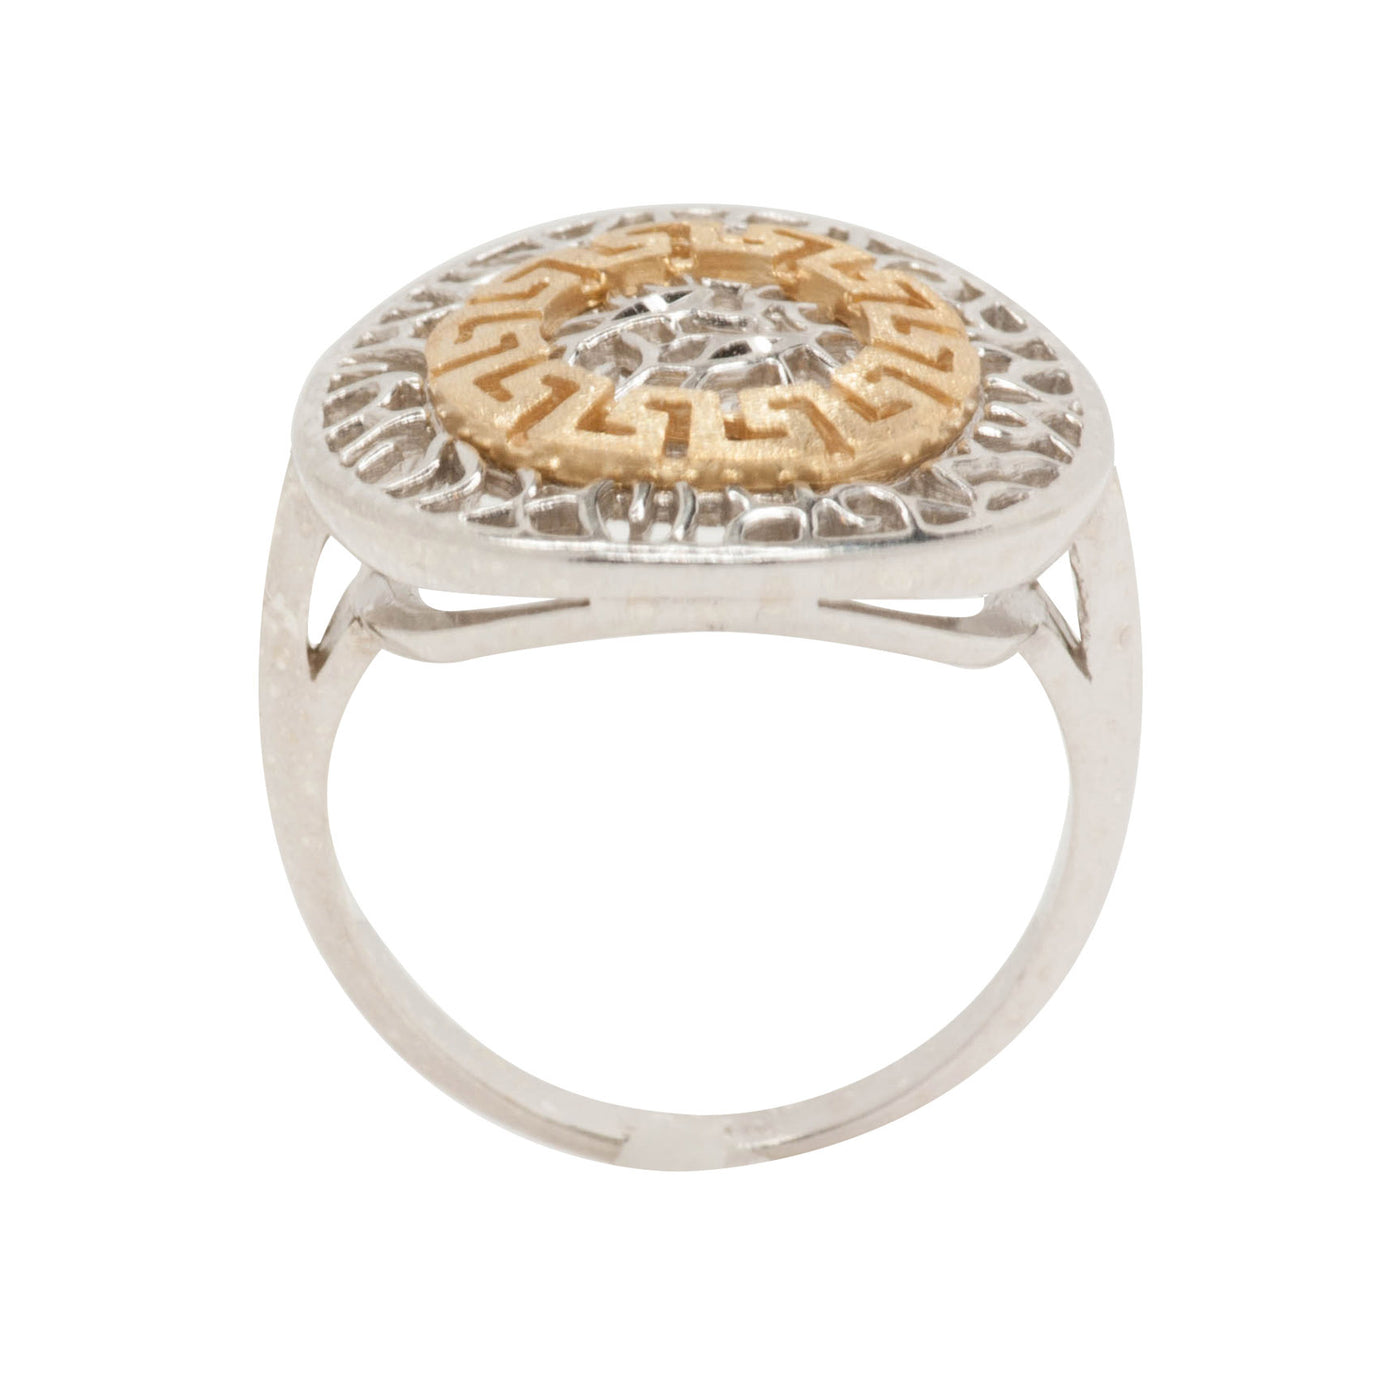 Rebecca Sloane Gold and Silver Accented Greek Key Medallion Ring